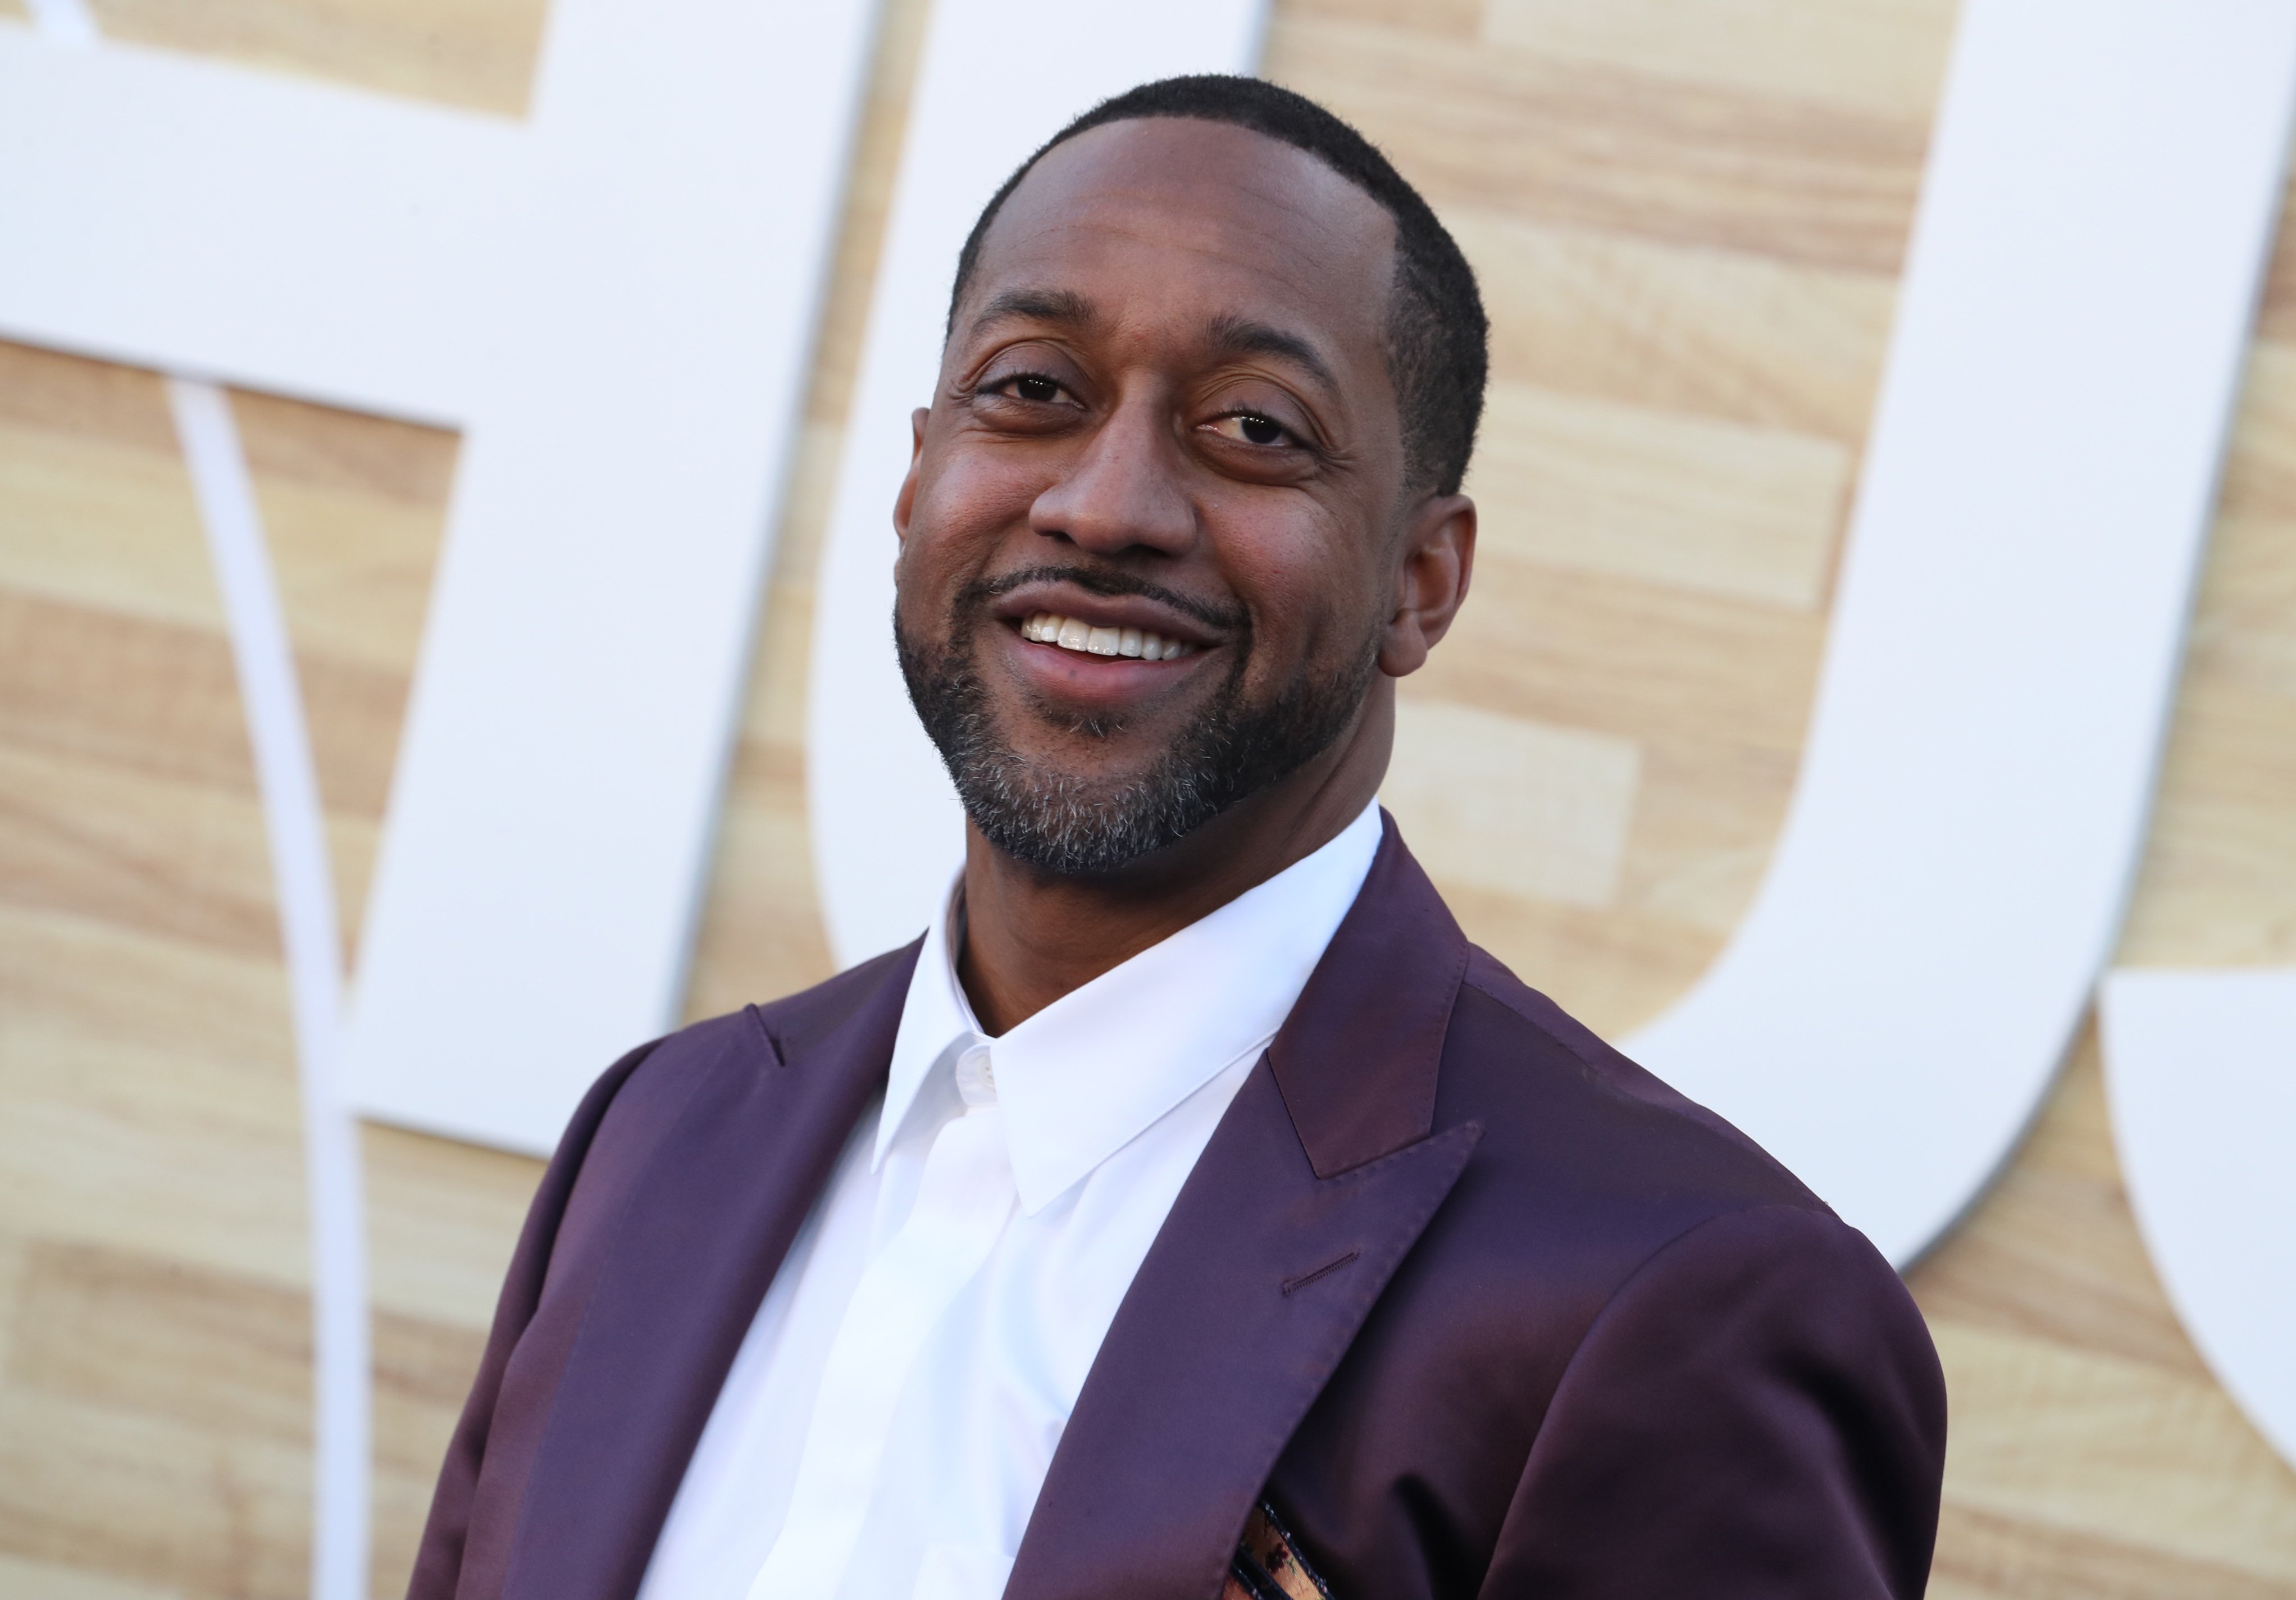 <p>Whoa, mama! Yes, that's Jaleel White, non-Urkelized. He graduated from UCLA with a degree in film and television in 2001. Since then, he's kept busy with guest-starring spots on TV and small movie parts including roles in "Dreamgirls" and "Judy Moody and the Not Bummer Summer." In 2012, he competed on season 14 of "Dancing With the Stars," where he earned the nickname "Jerkel." He appeared on an episode of "Atlanta" in 2016 starring as -- who else? -- himself. He nabbed a role on the CBS show "Me, Myself and I" from 2017 until 2018 and appeared on the 2020 TV show "The Big Show Show." From 2020 to 2021, Jaleel voiced Gene the Genie on Disney's "DuckTales" reboot; he more recently appeared on 2022's "North of the 10." Jaleel and girlfriend Bridget Hardy welcomed a daughter, Samaya, in 2009. But they split and Bridget later accused her ex of domestic violence.</p>